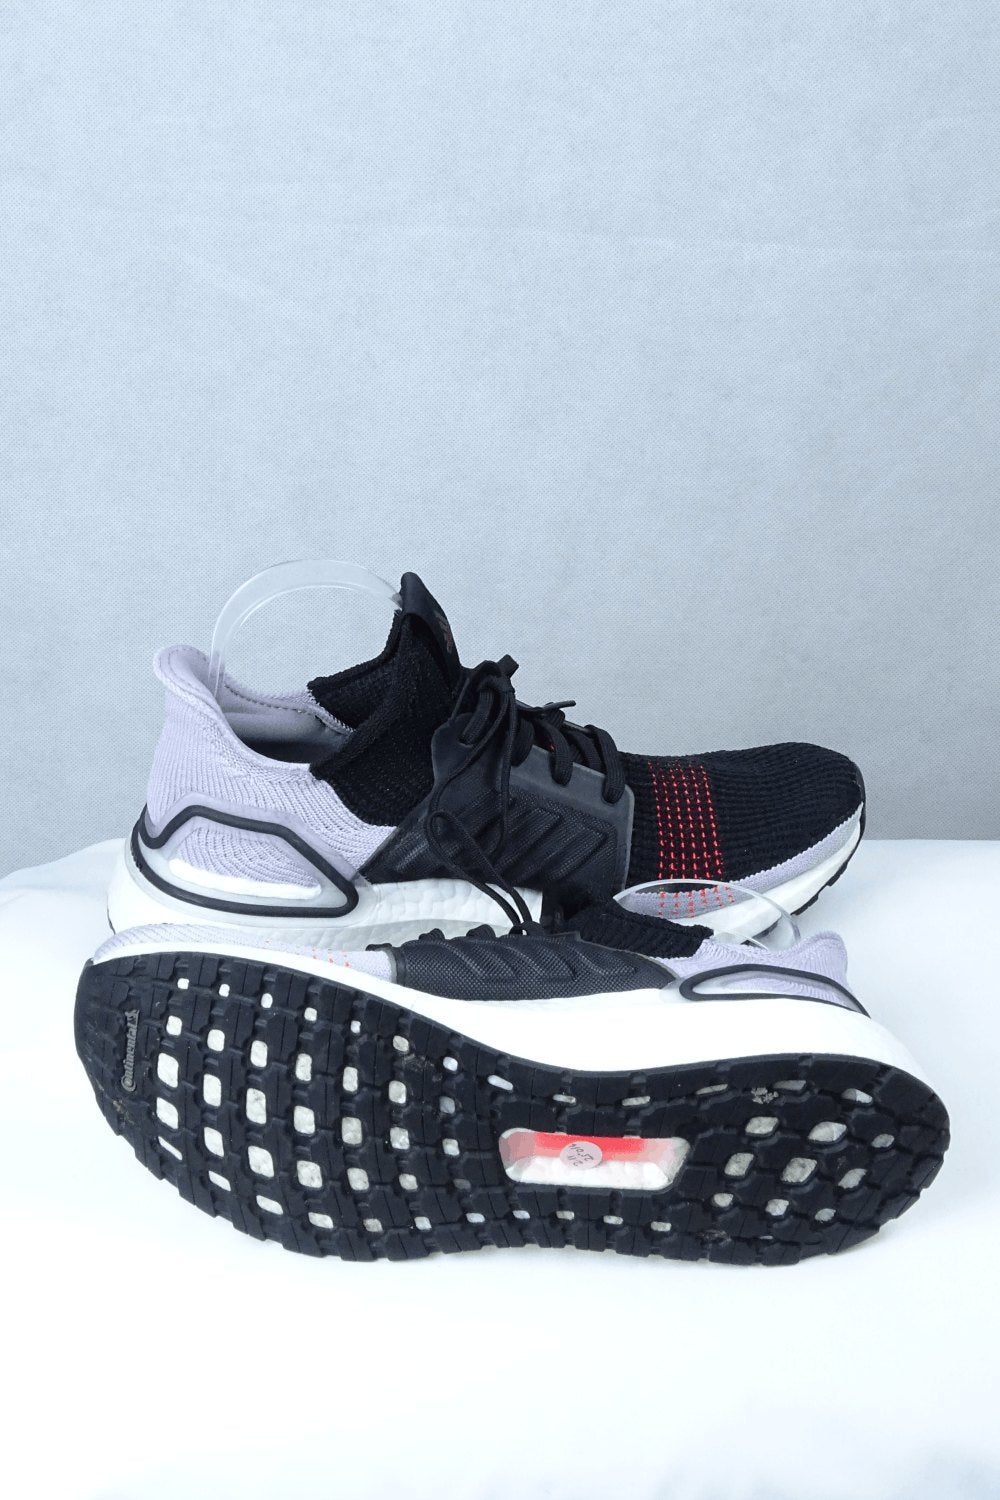 Boost Black And Purple Runners 9.5